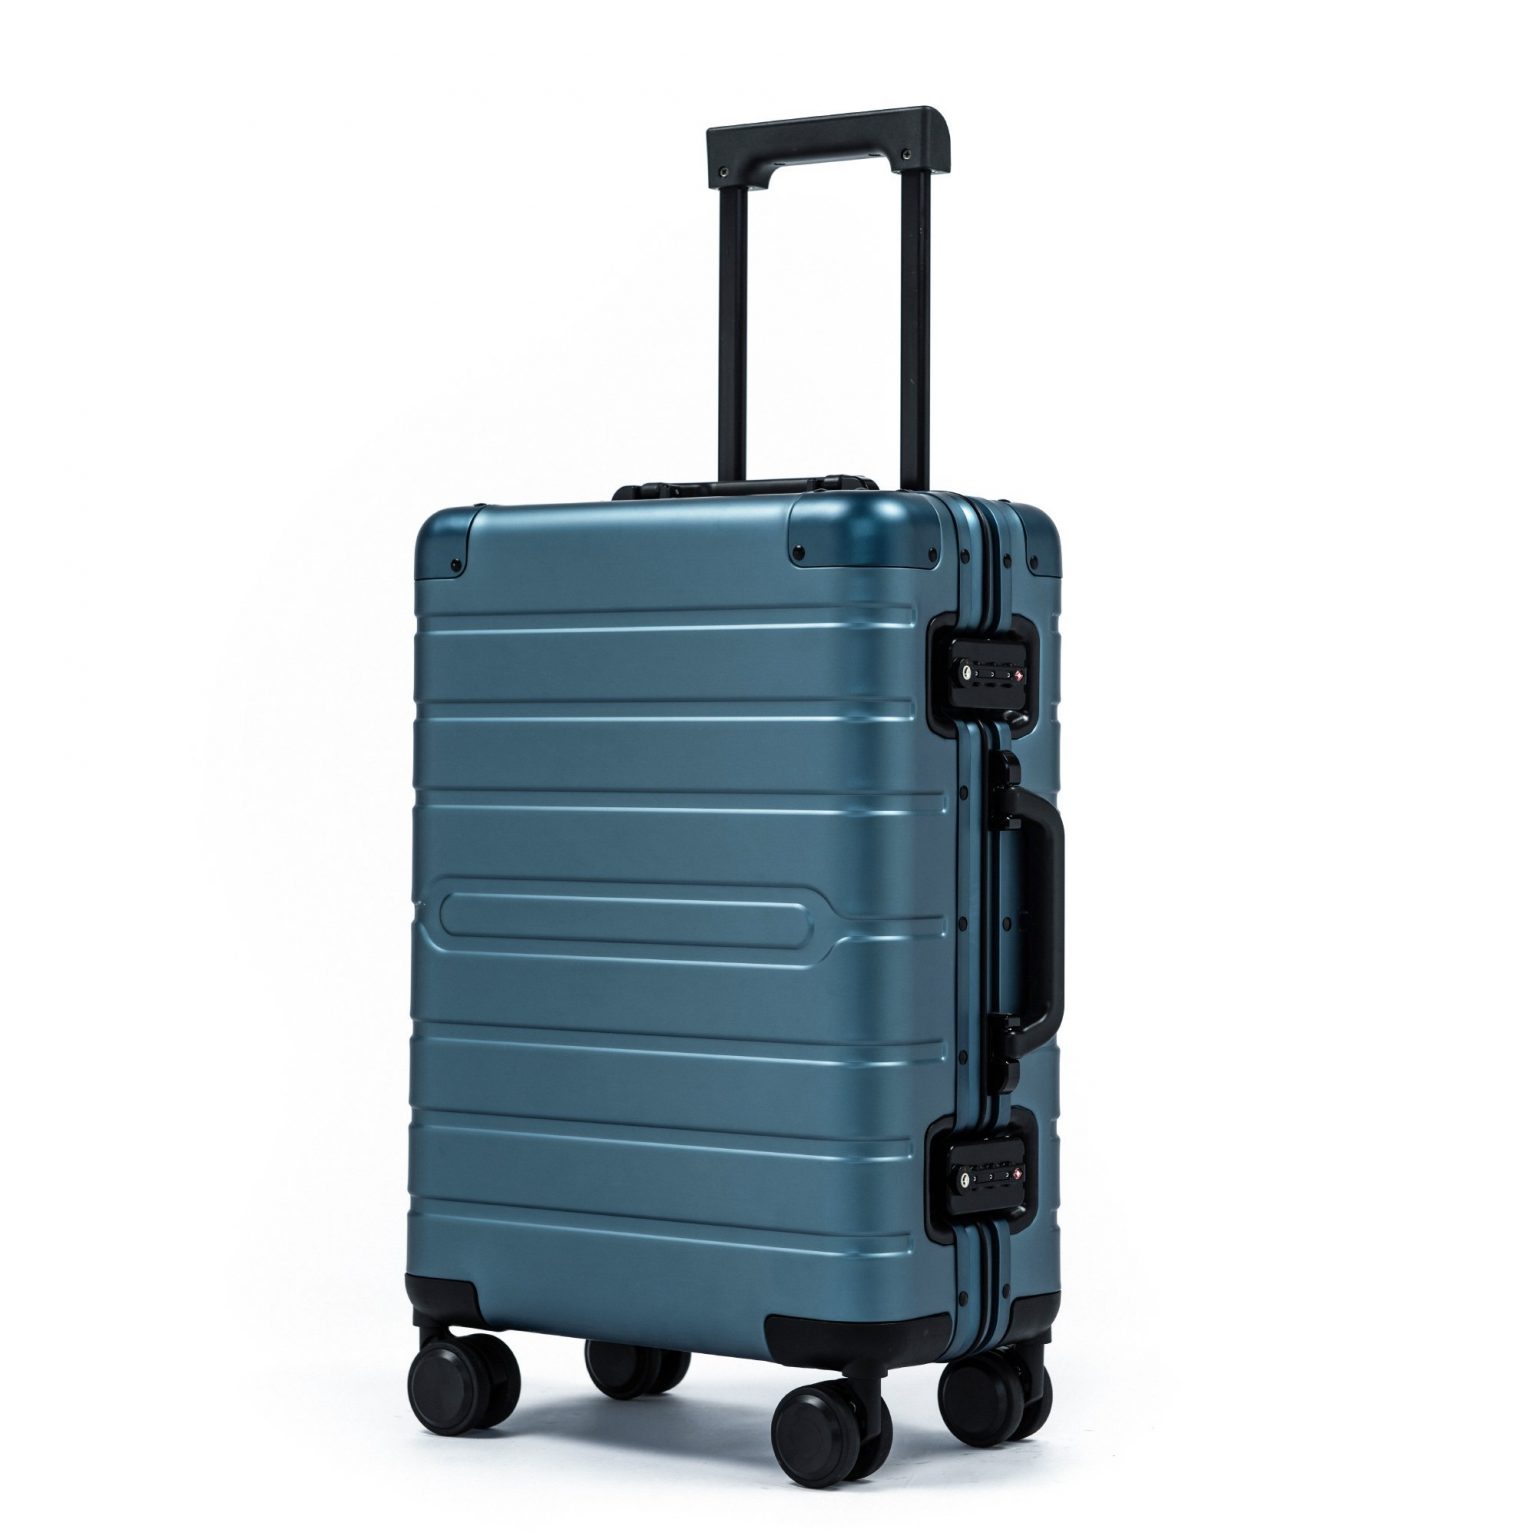 MVST Select Our List of the Best MVST Luggage Luggage & Travel